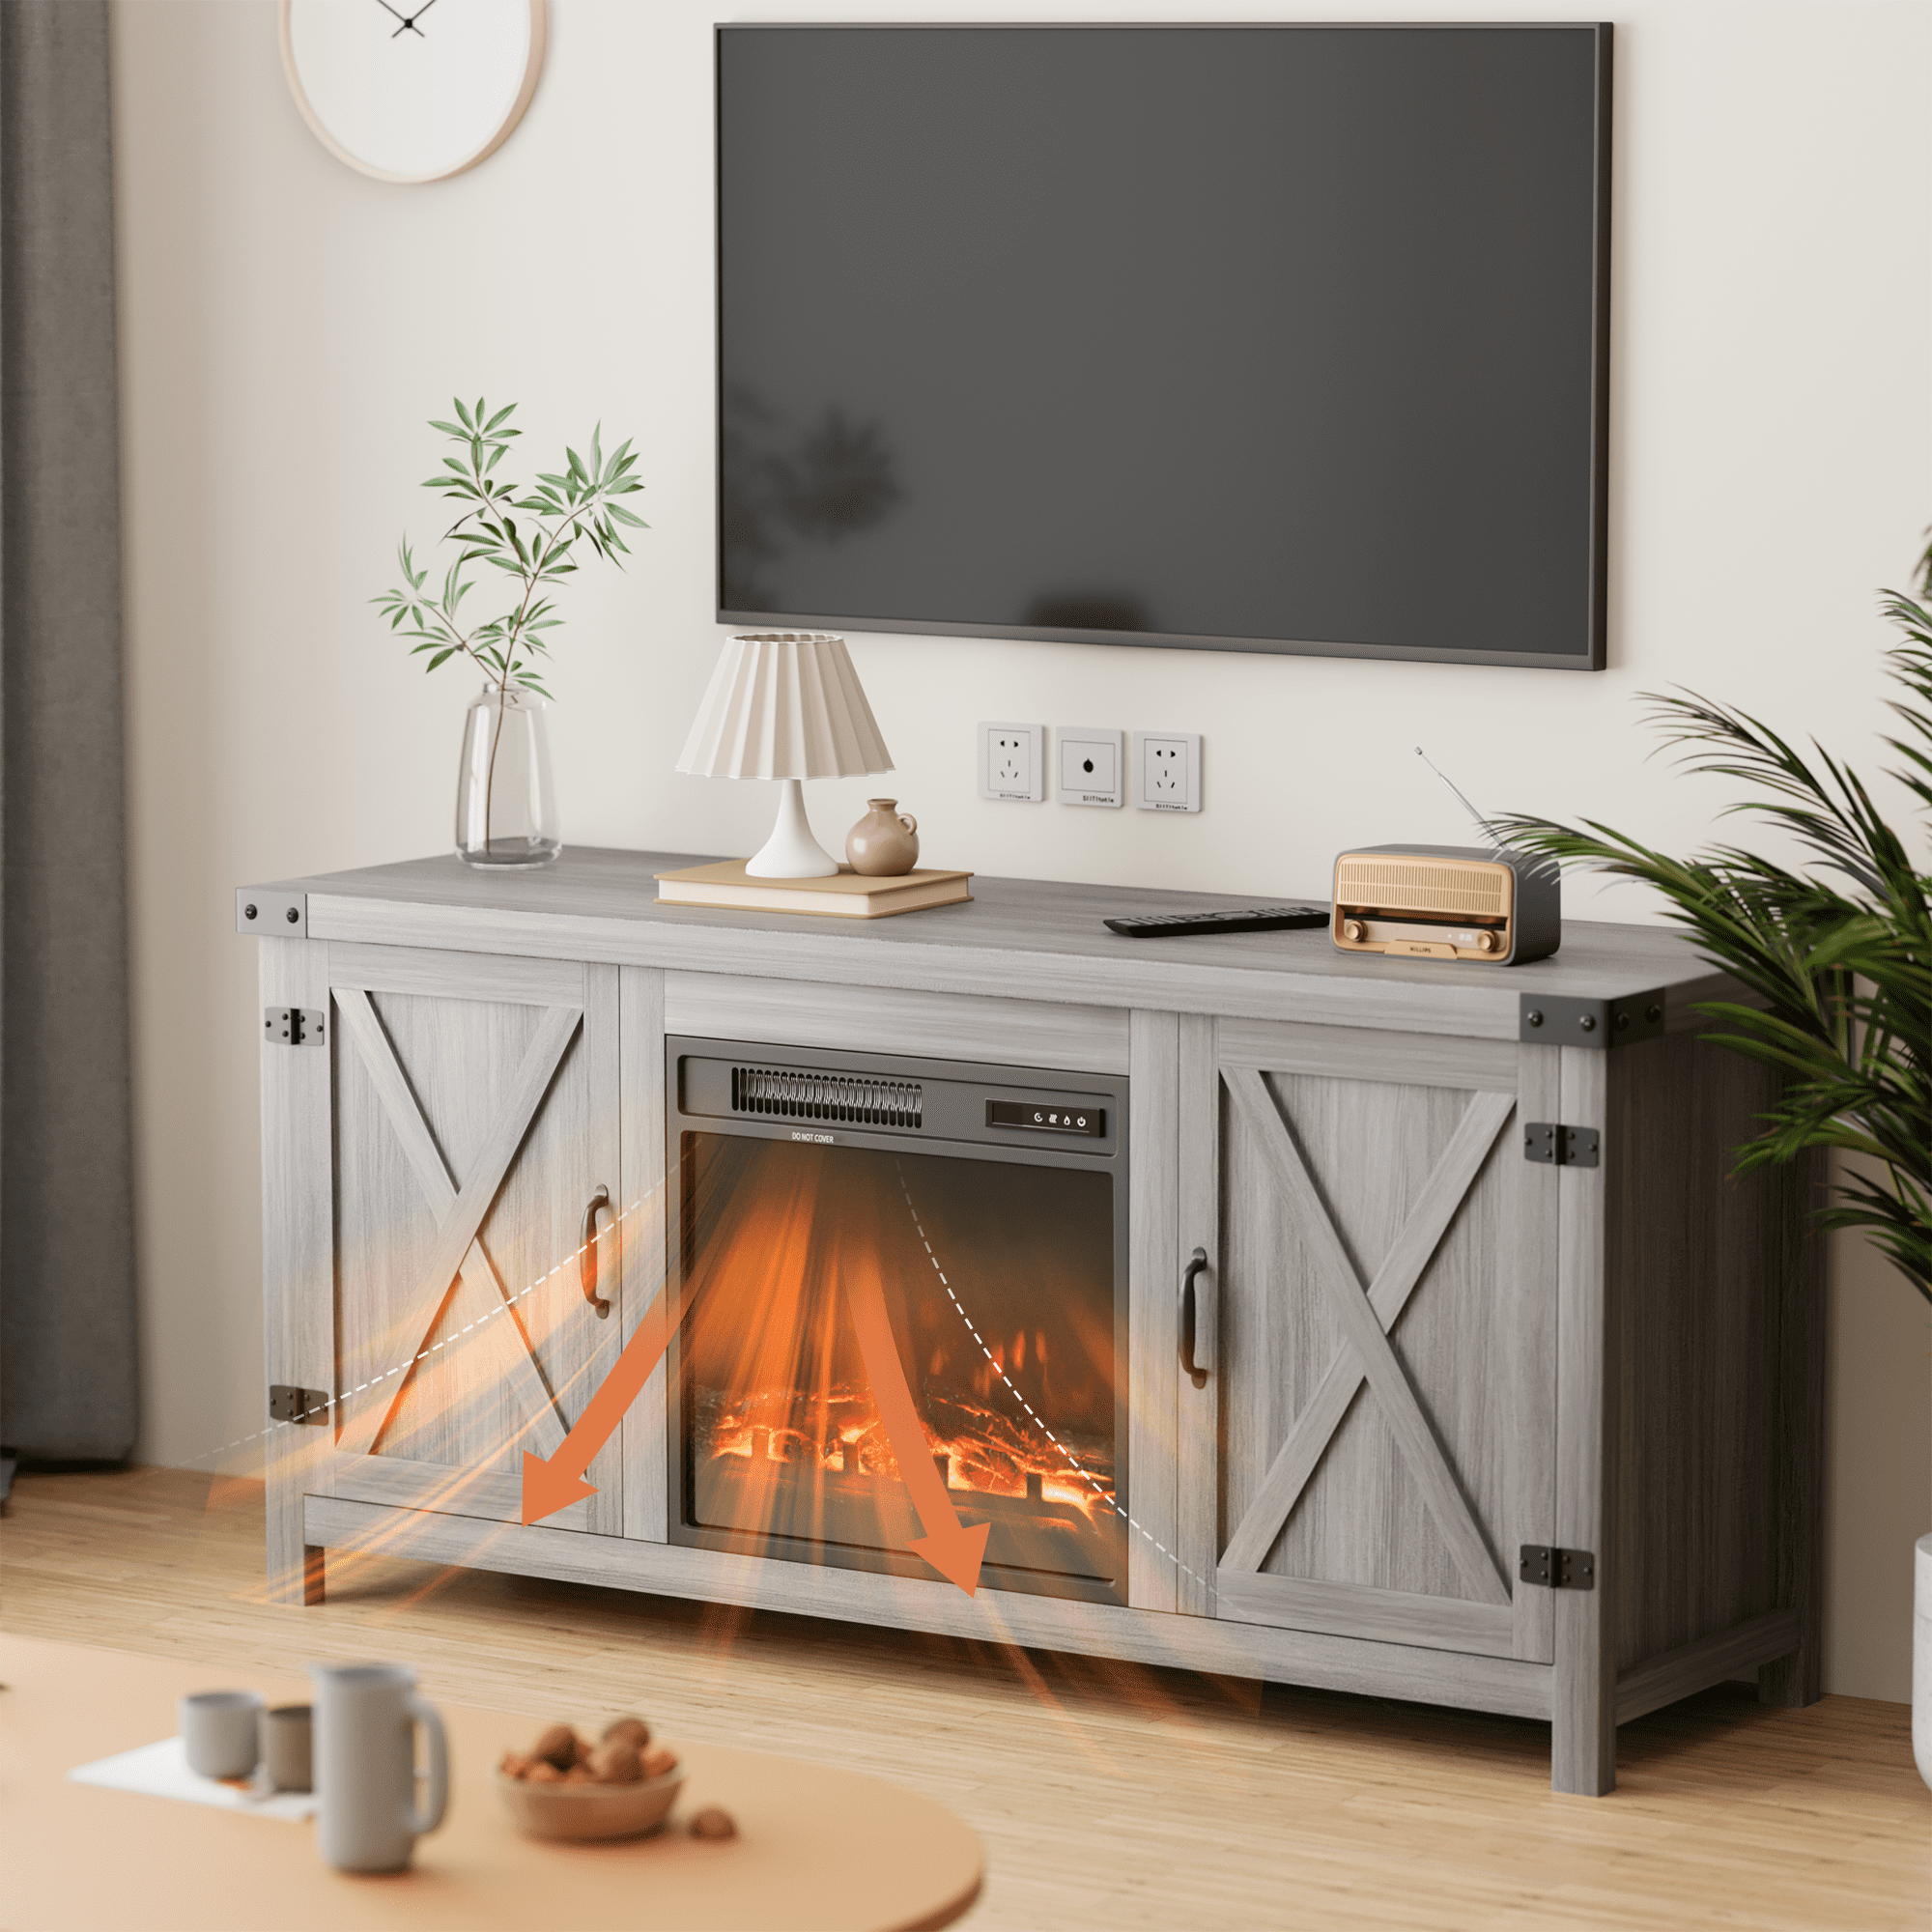 Homall Modern Farmhouse Tv Stand Double Barn Door Fireplace Tv Stand For  Tvs Up To 65 Inch, 58 Inch,grey Wash – Walmart With Regard To Modern Farmhouse Barn Tv Stands (View 13 of 15)